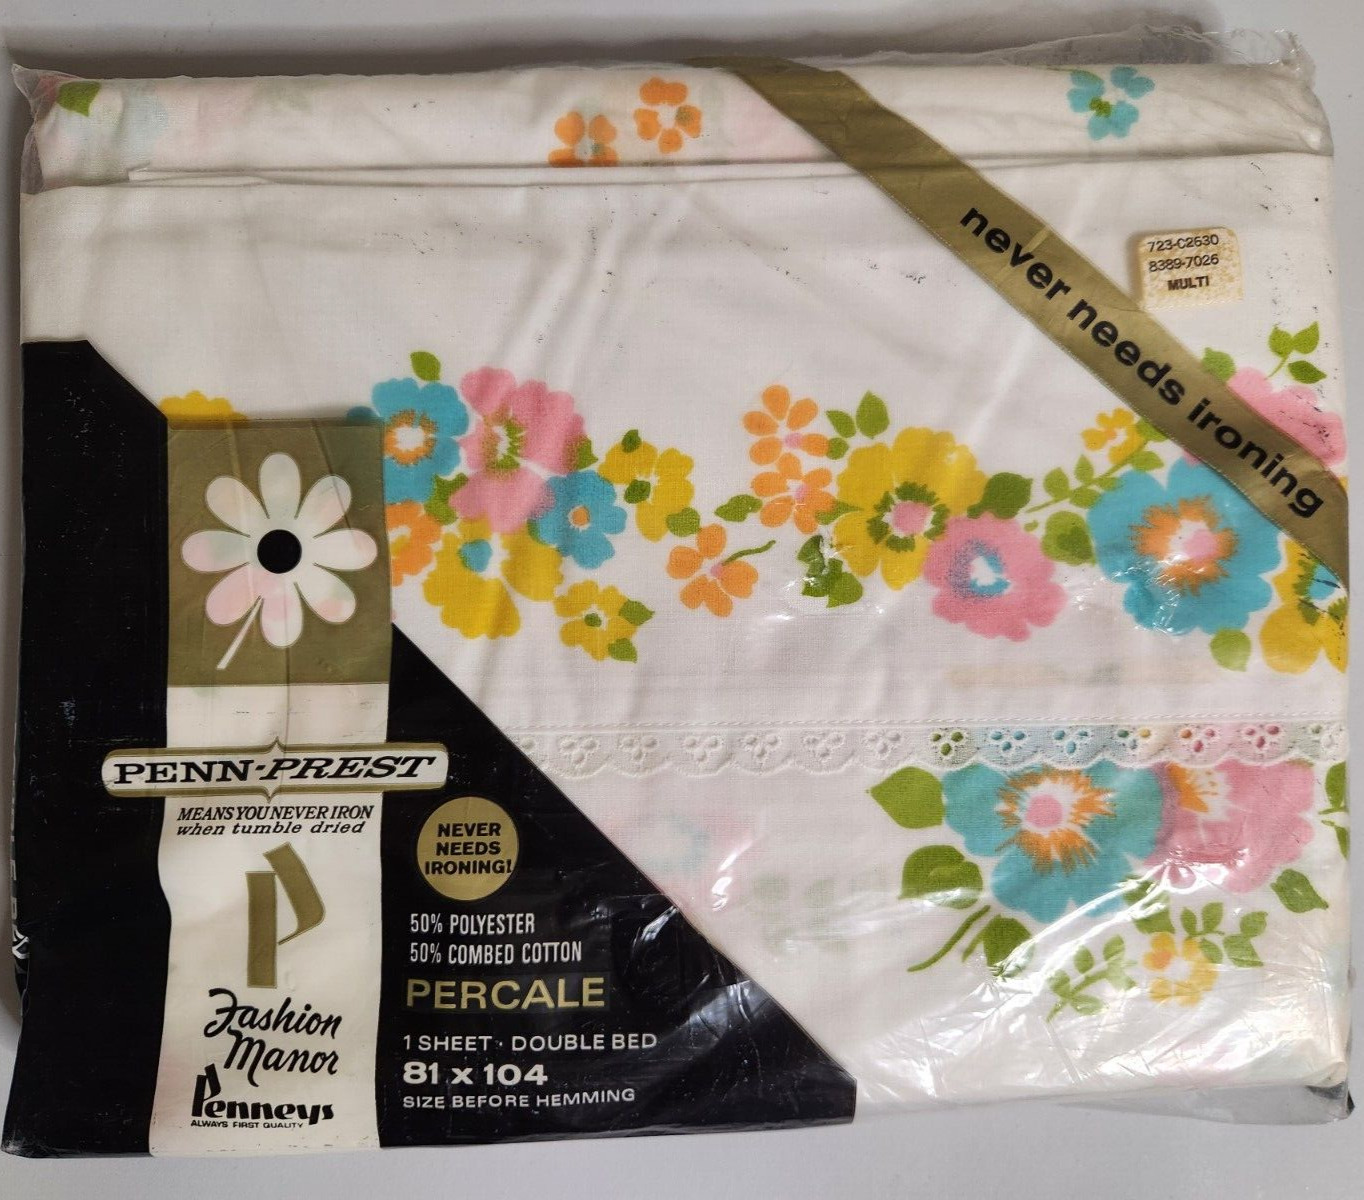 NEW Vintage Fashion Manor Penneys Double Bed Flat Sheet  81”x104” 1970s Floral